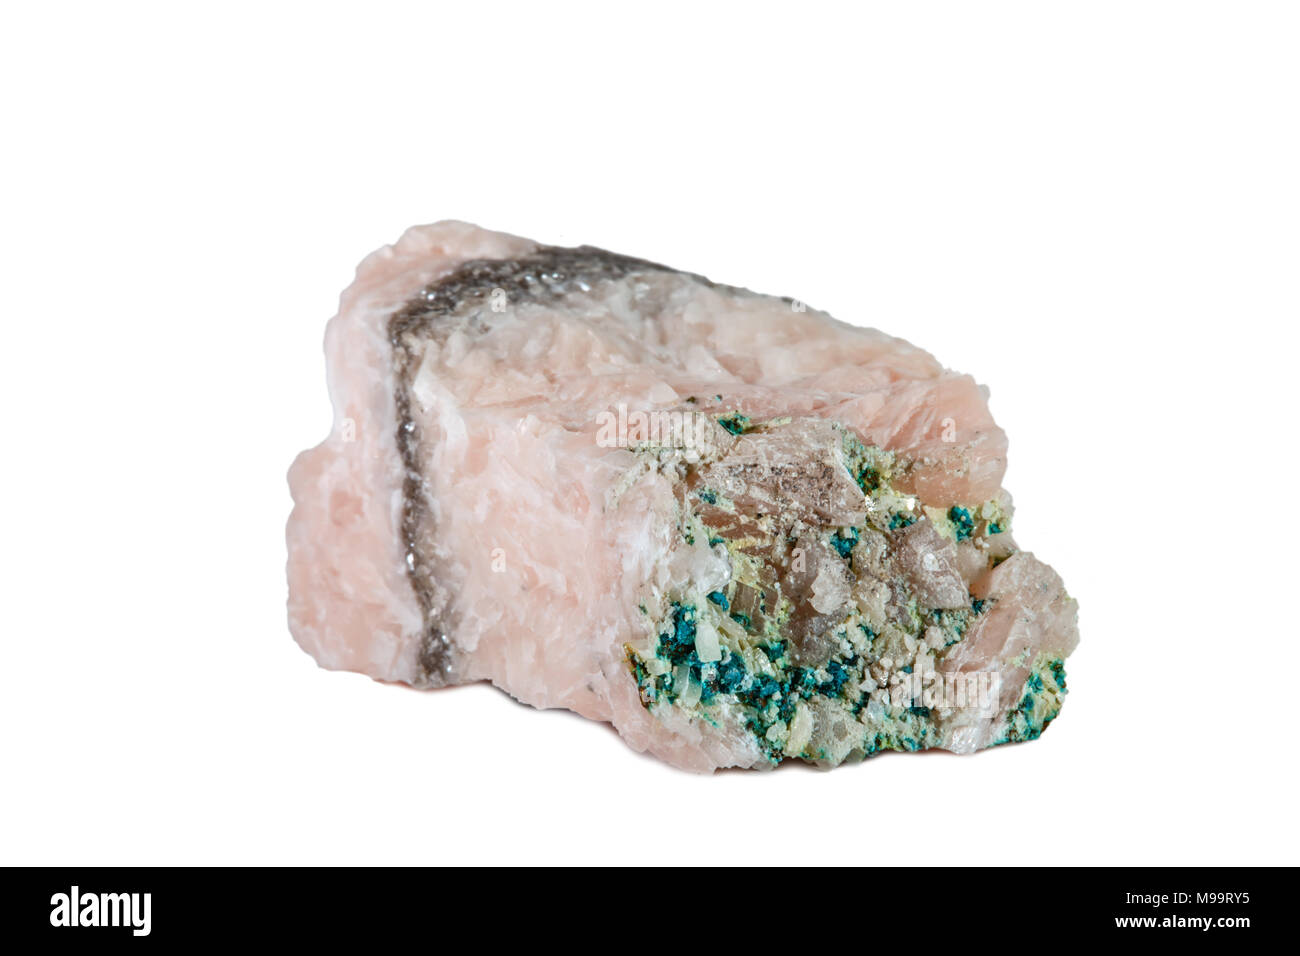 Macro shooting of natural gemstone. Raw mineral dolomite, Morocco. Isolated object on a white background. Stock Photo